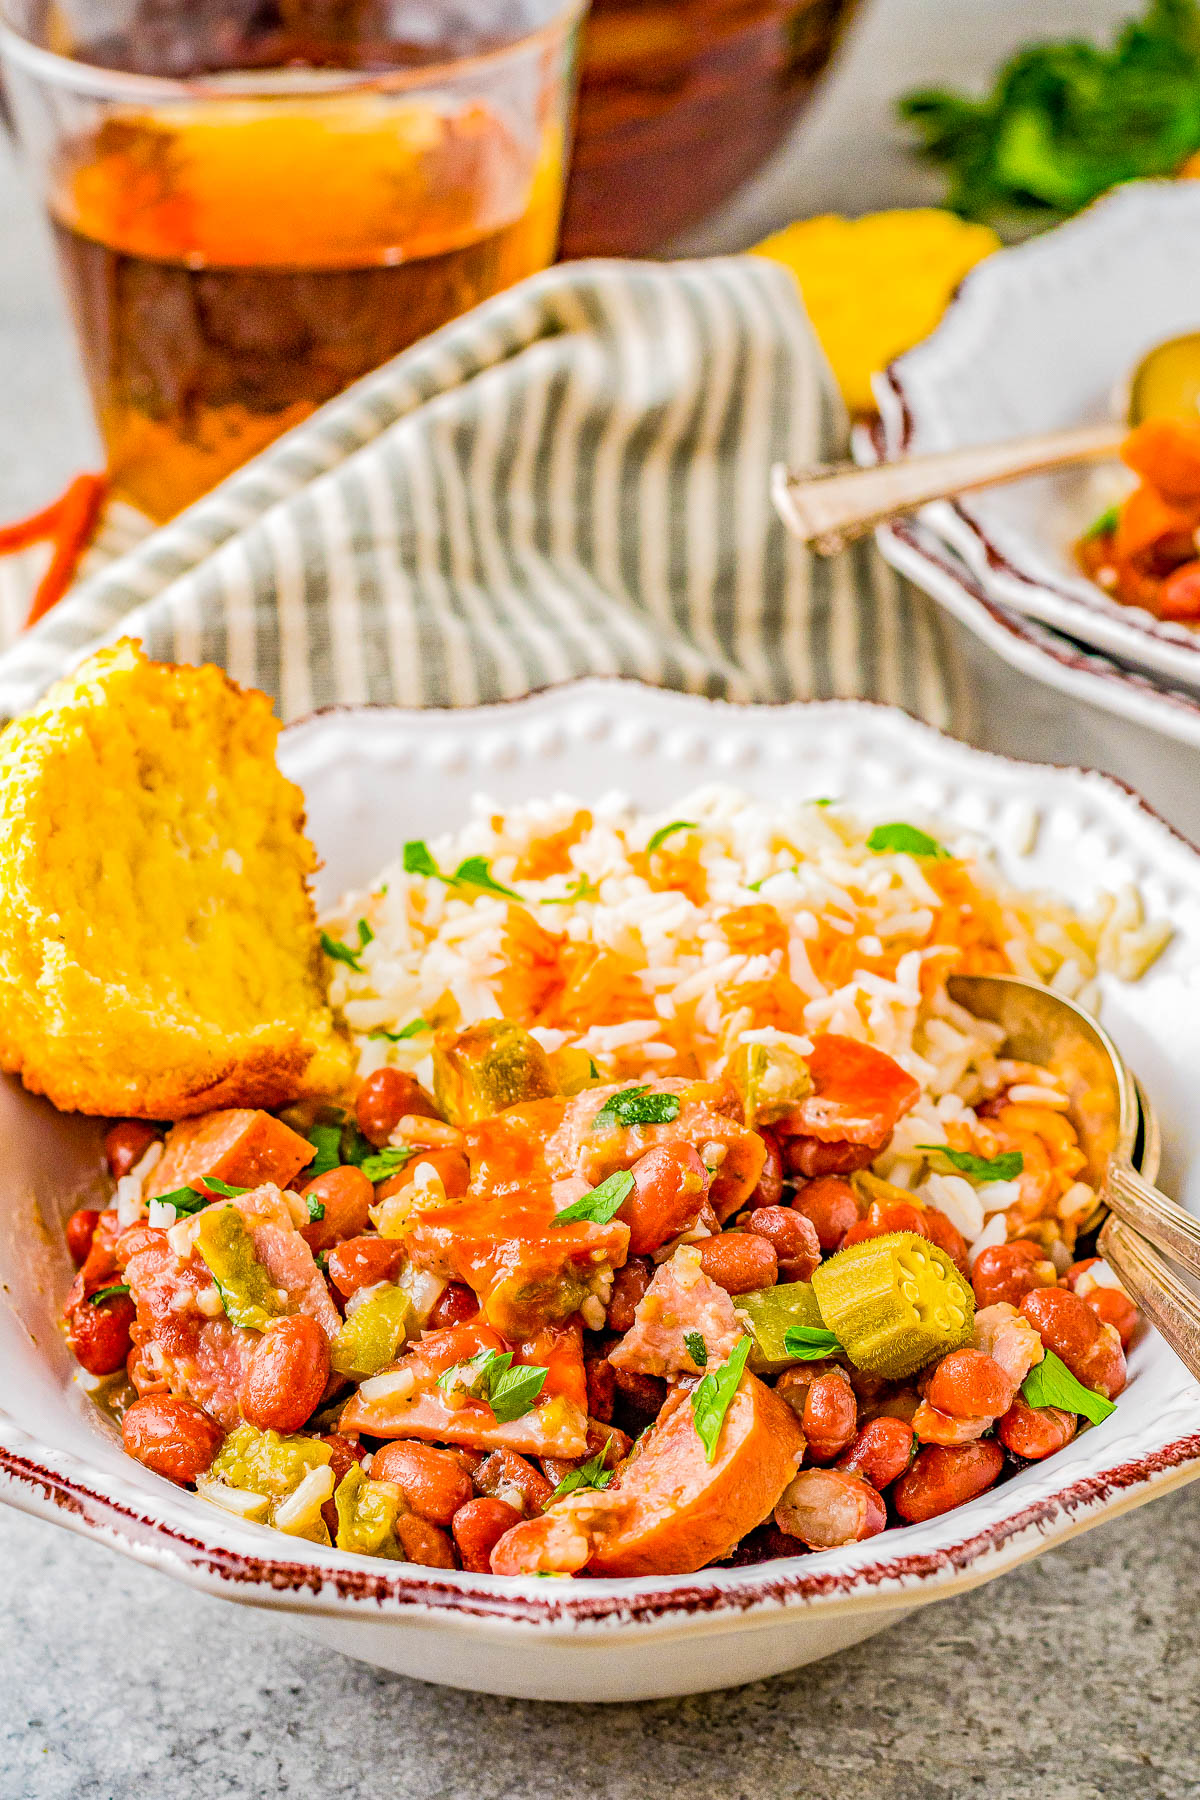 Red Beans and Rice - Louisiana style red beans and rice is a Southern comfort food classic that's EASY to make! Complete with Andouille sausage, ham, Creole seasoning, tender red beans, and plenty of fluffy rice, this dish packs some spiciness but it'll leave you coming back for more! 